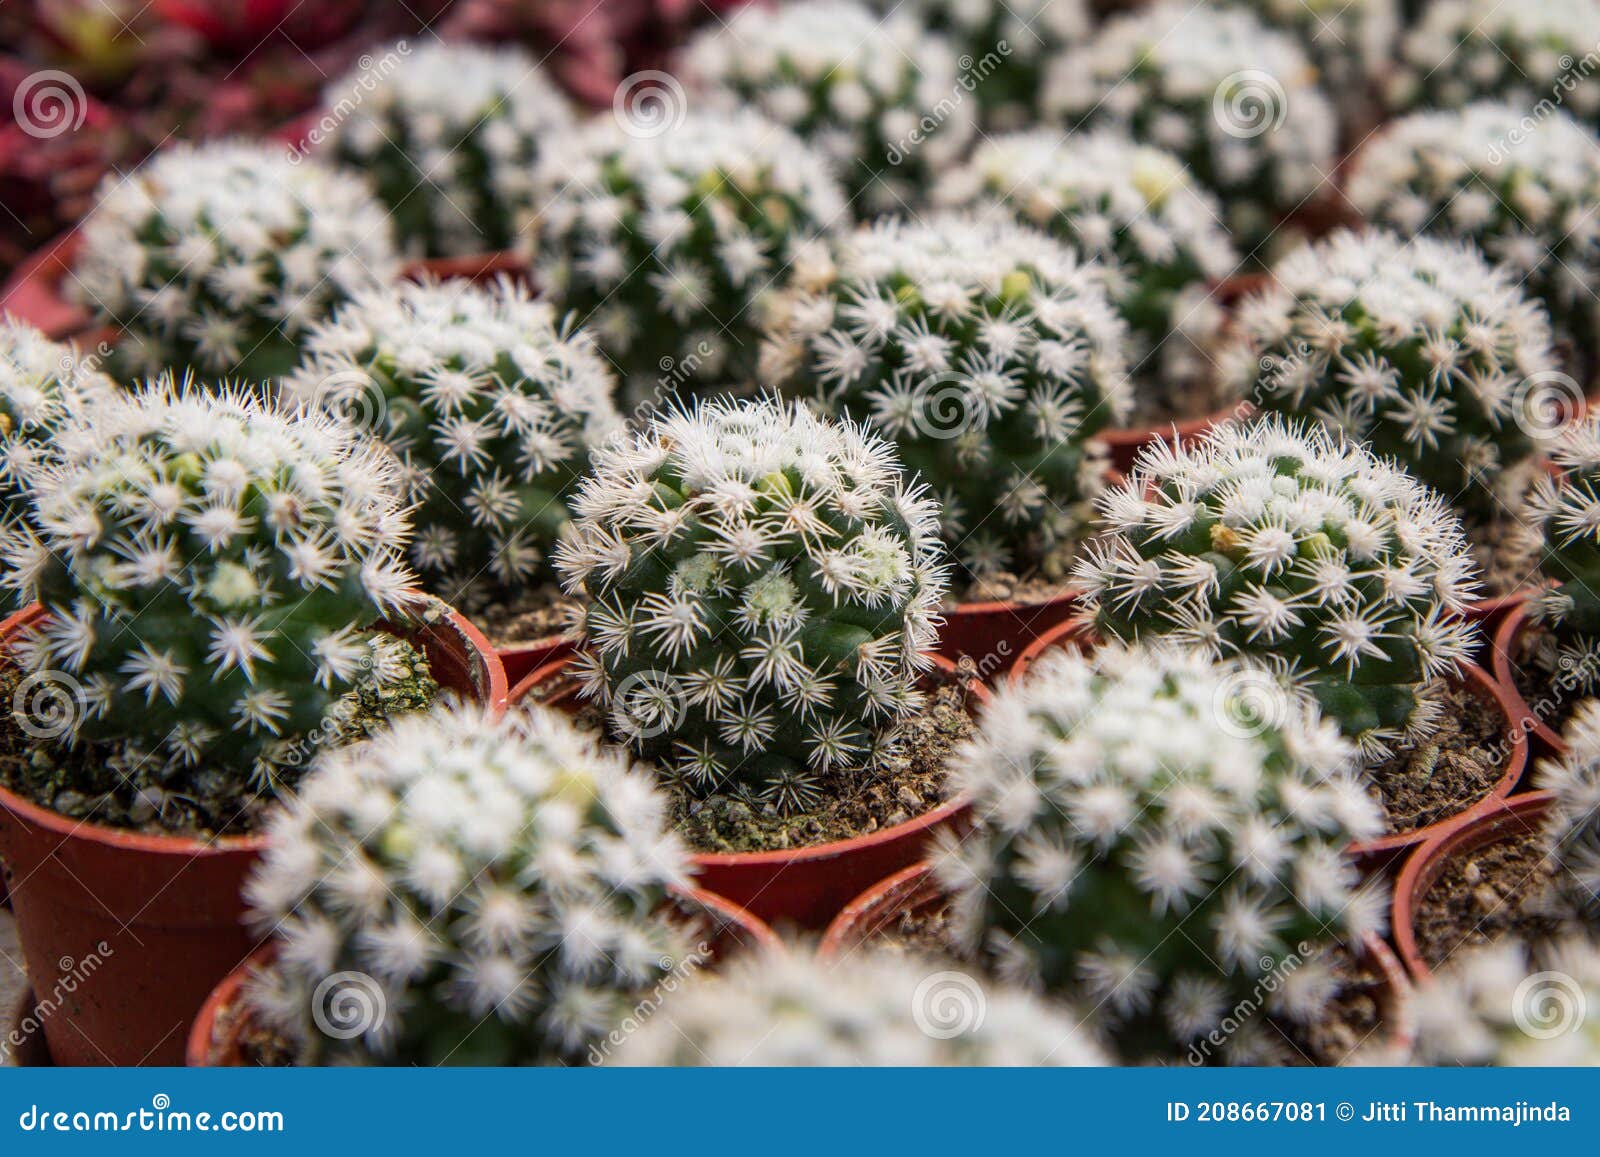 mammillaria gracilis oruga , a small cactus planted in a red pot in a nursery